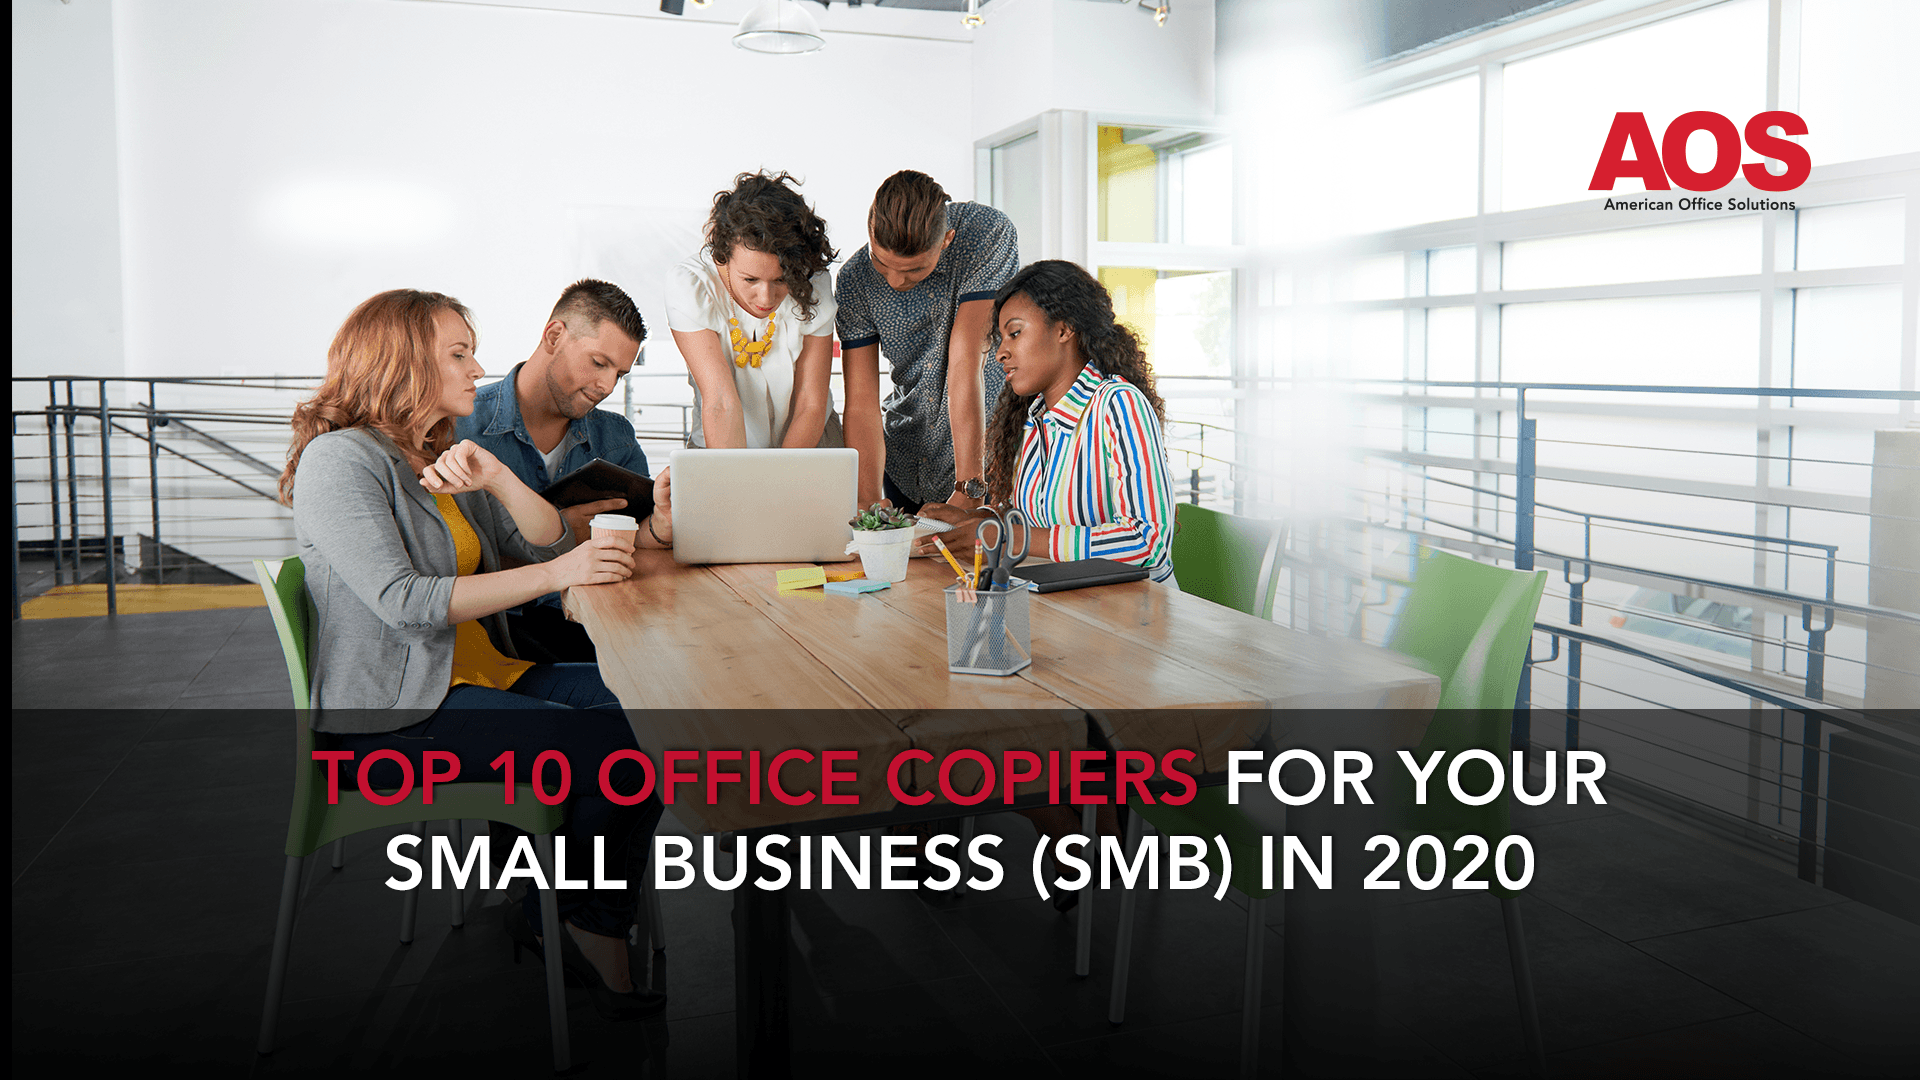 Top 10 Office Copiers For Your SMB in 2020